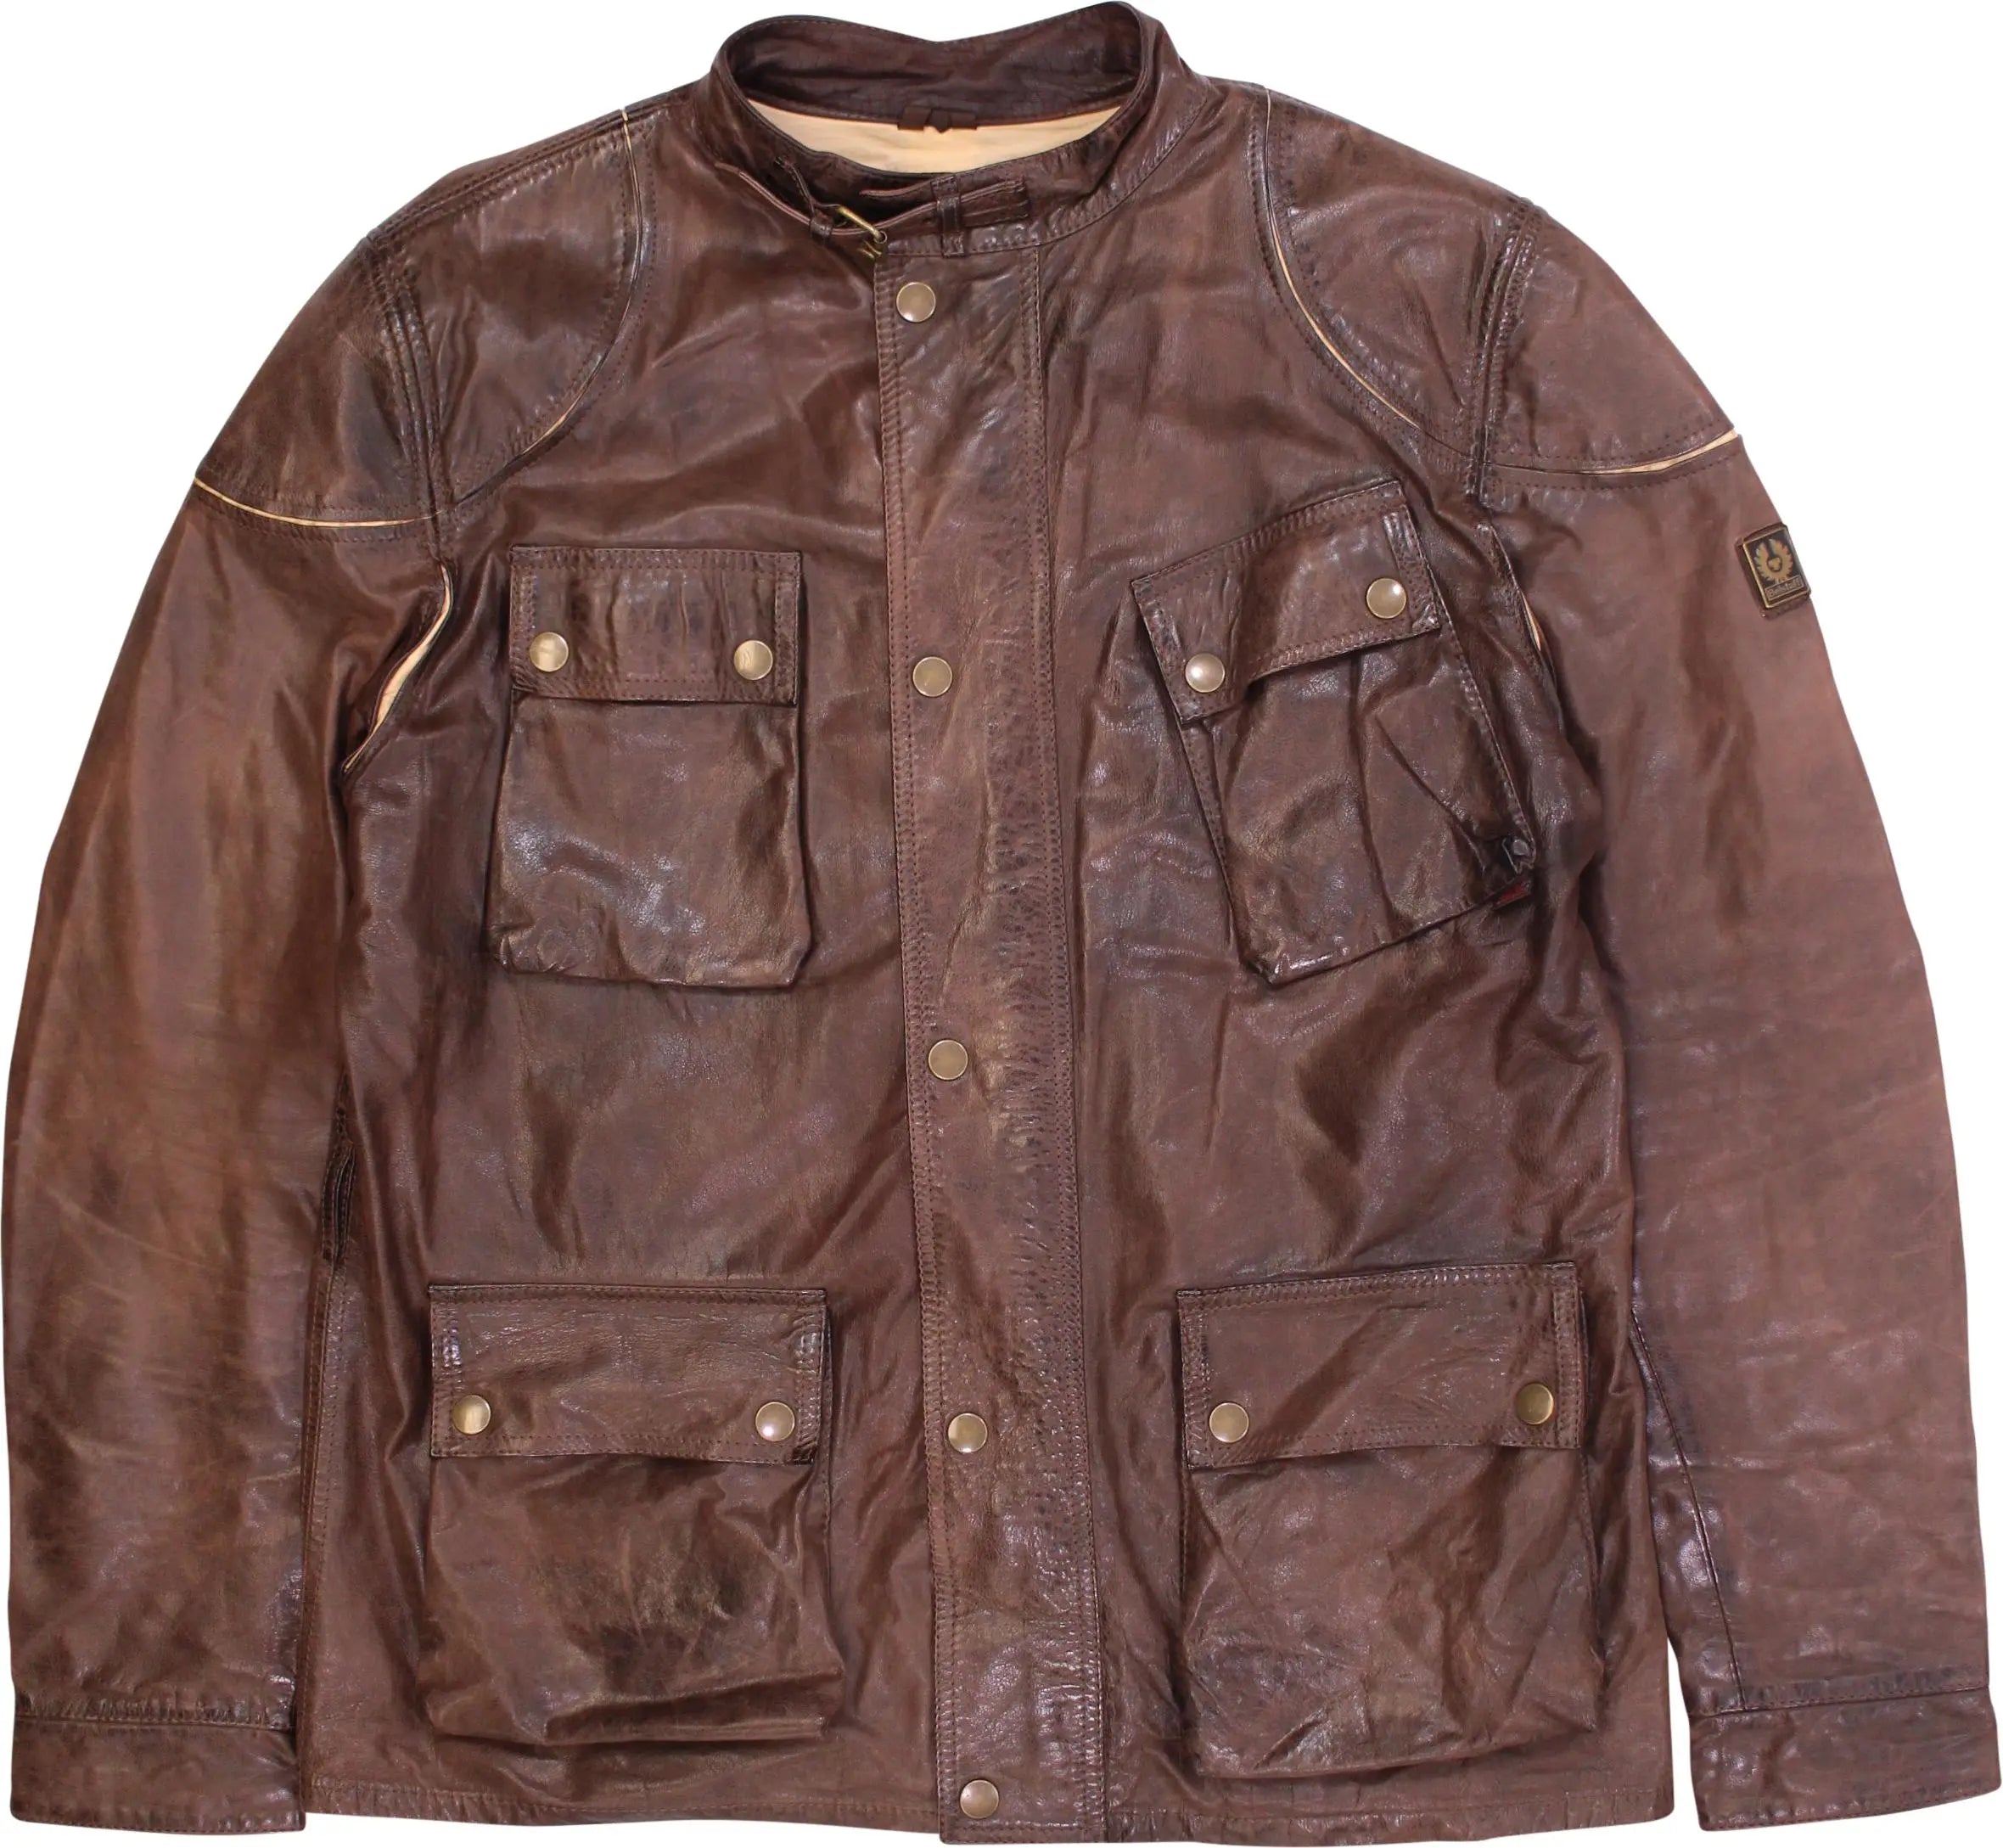 Belstaff - Brown Leather Jacket by Belstaff- ThriftTale.com - Vintage and second handclothing